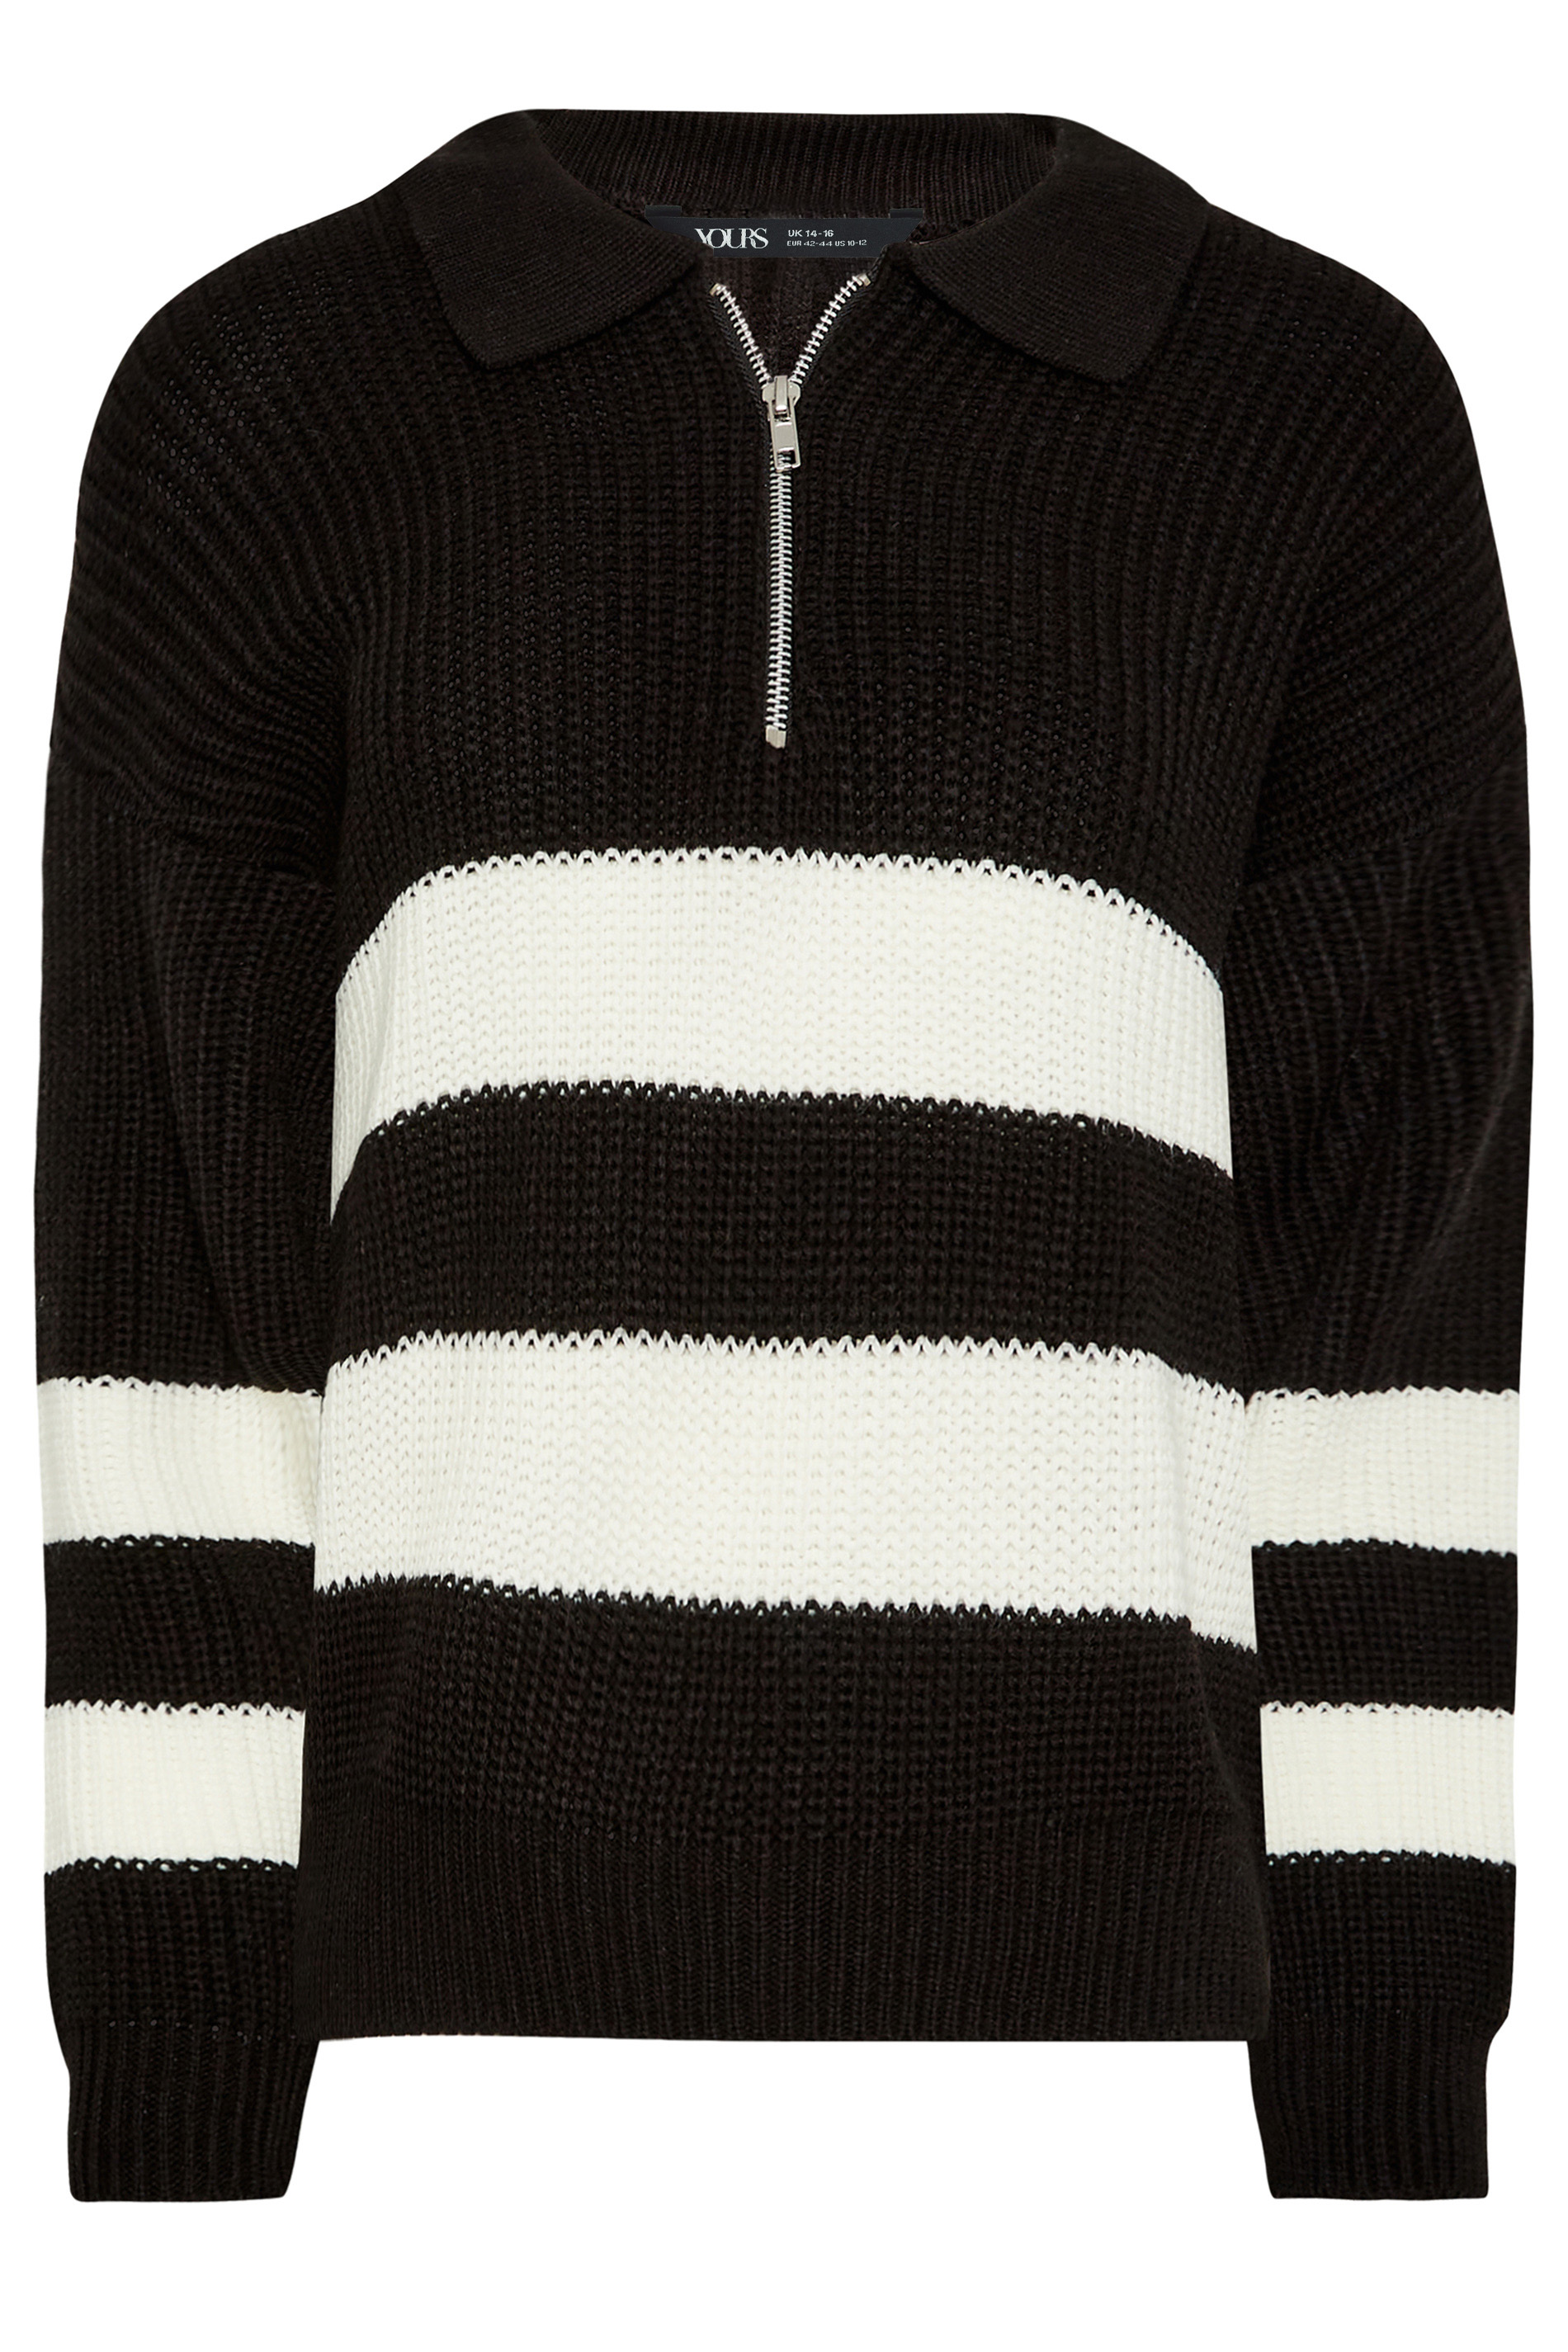 YOURS PETITE Plus Size Black & White Stripe Zip Collar Jumper | Yours Clothing 1